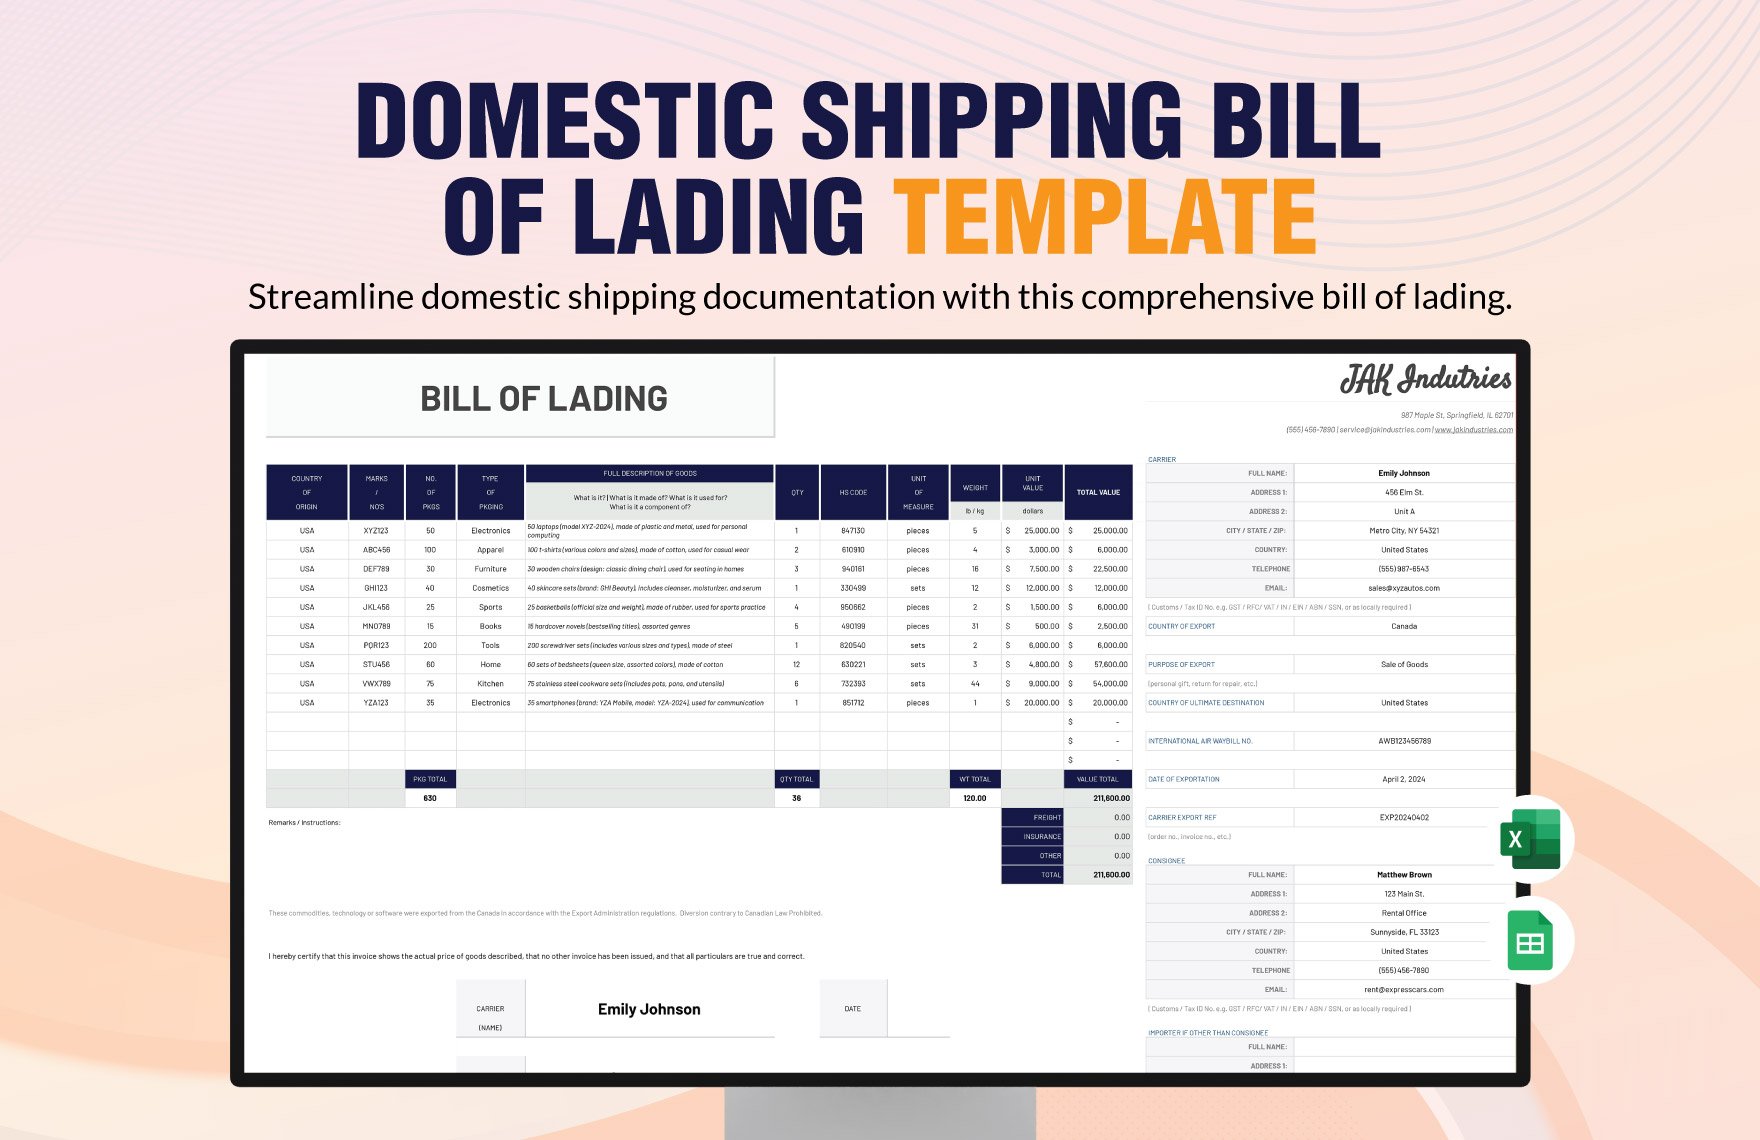 Domestic Shipping Bill of Lading Template